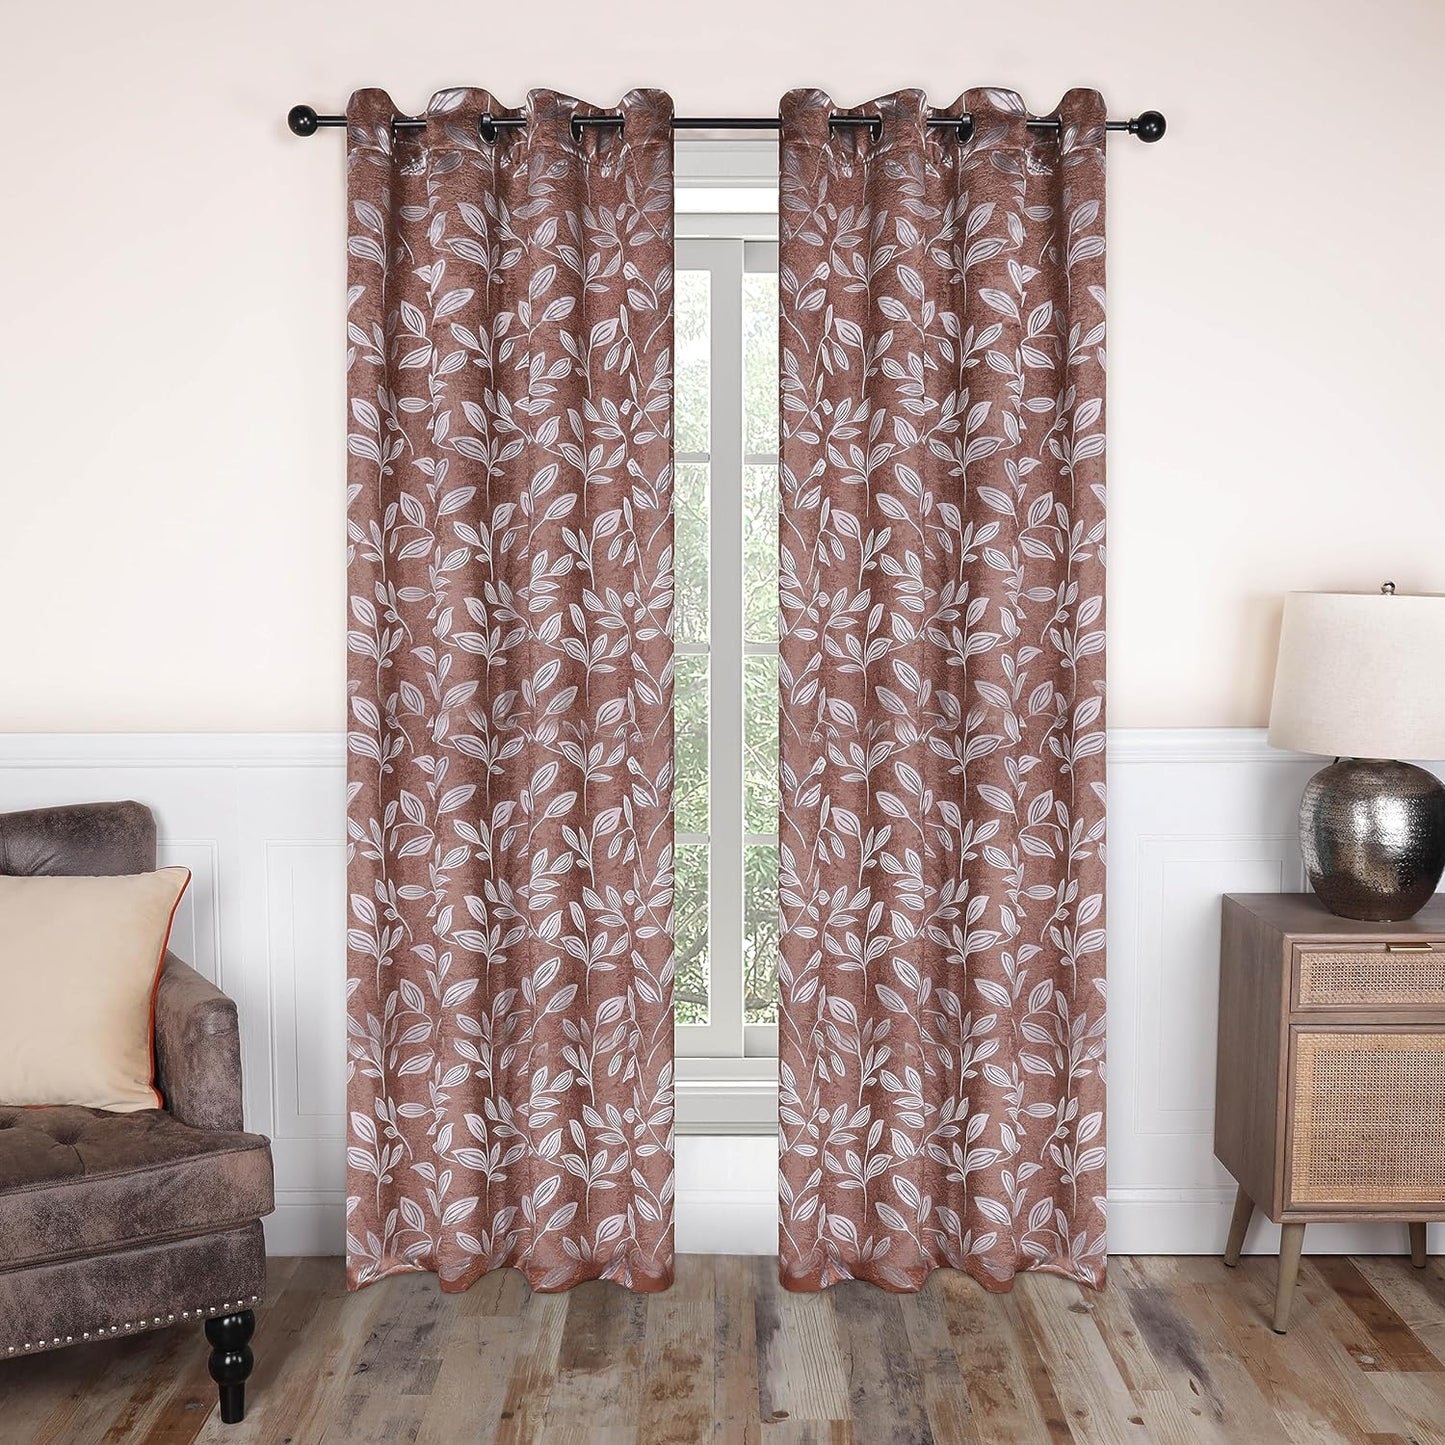 Superior Blackout Curtains, Room Darkening Window Accent for Bedroom, Sun Blocking, Thermal, Modern Bohemian Curtains, Leaves Collection, Set of 2 Panels, Rod Pocket - 52 in X 63 In, Nickel Black  Home City Inc. Cooper 52 In X 108 In (W X L) 